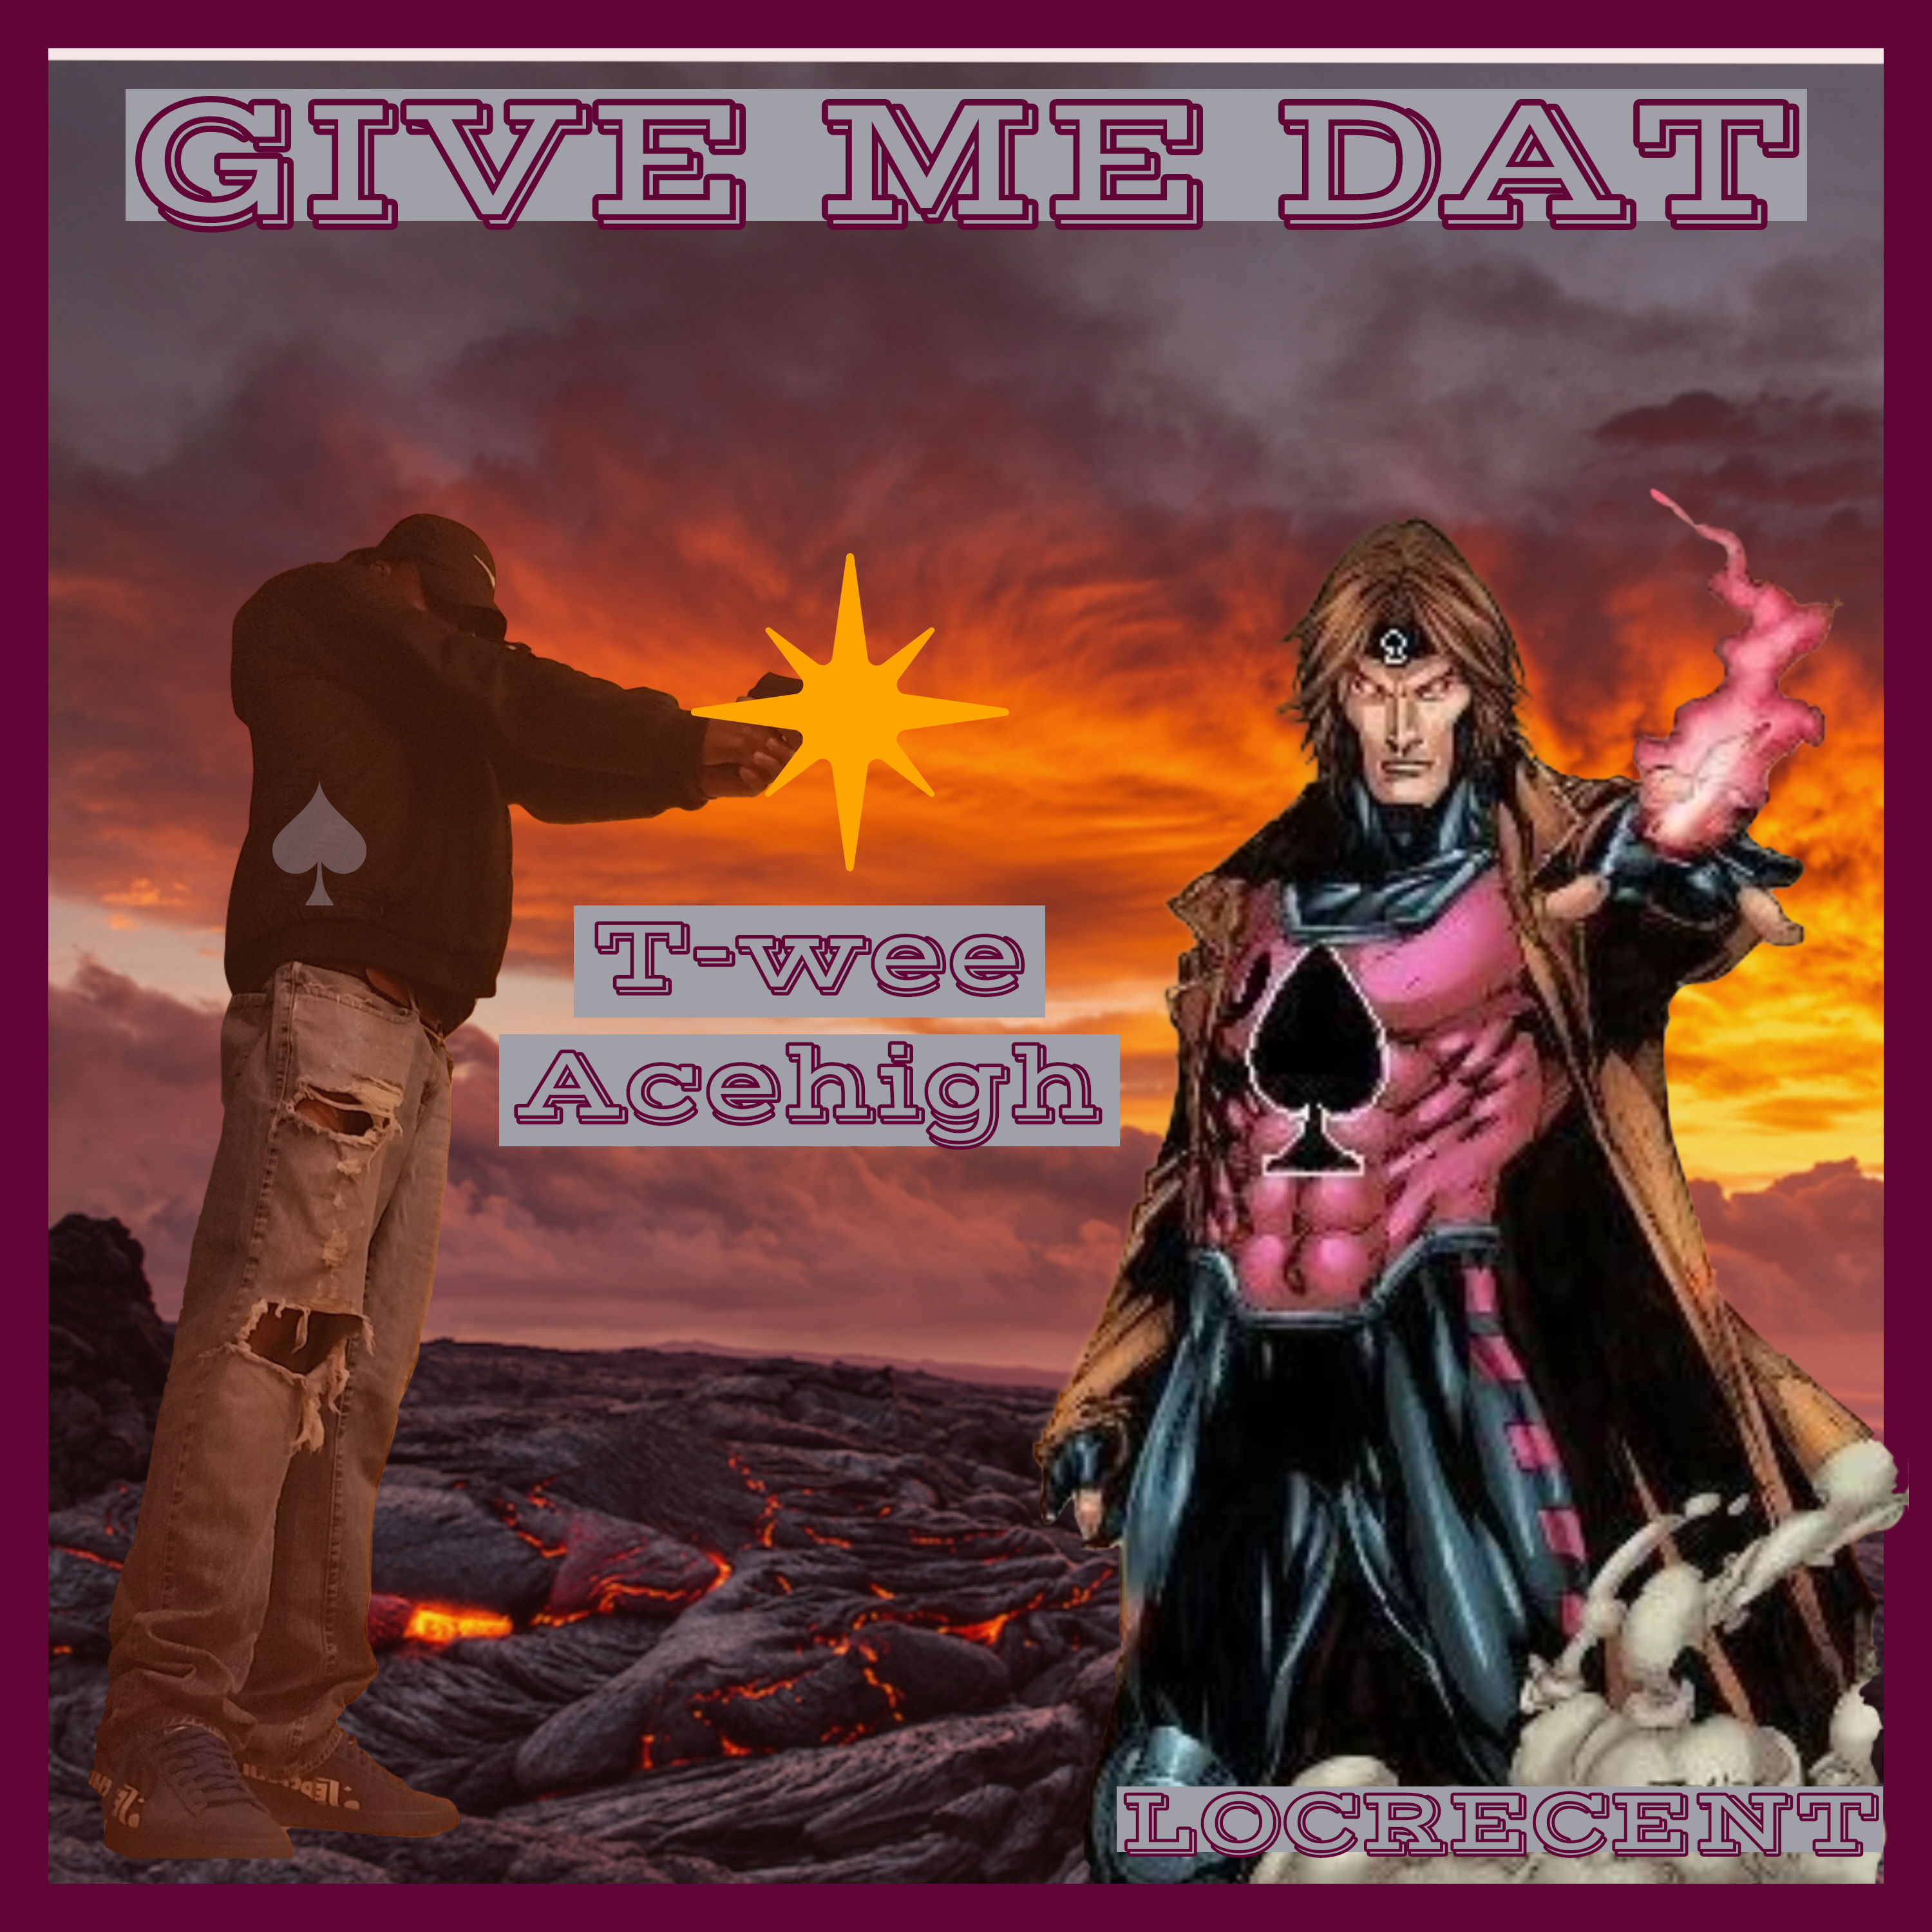 Art for Give me Dat by T-wee Acehigh